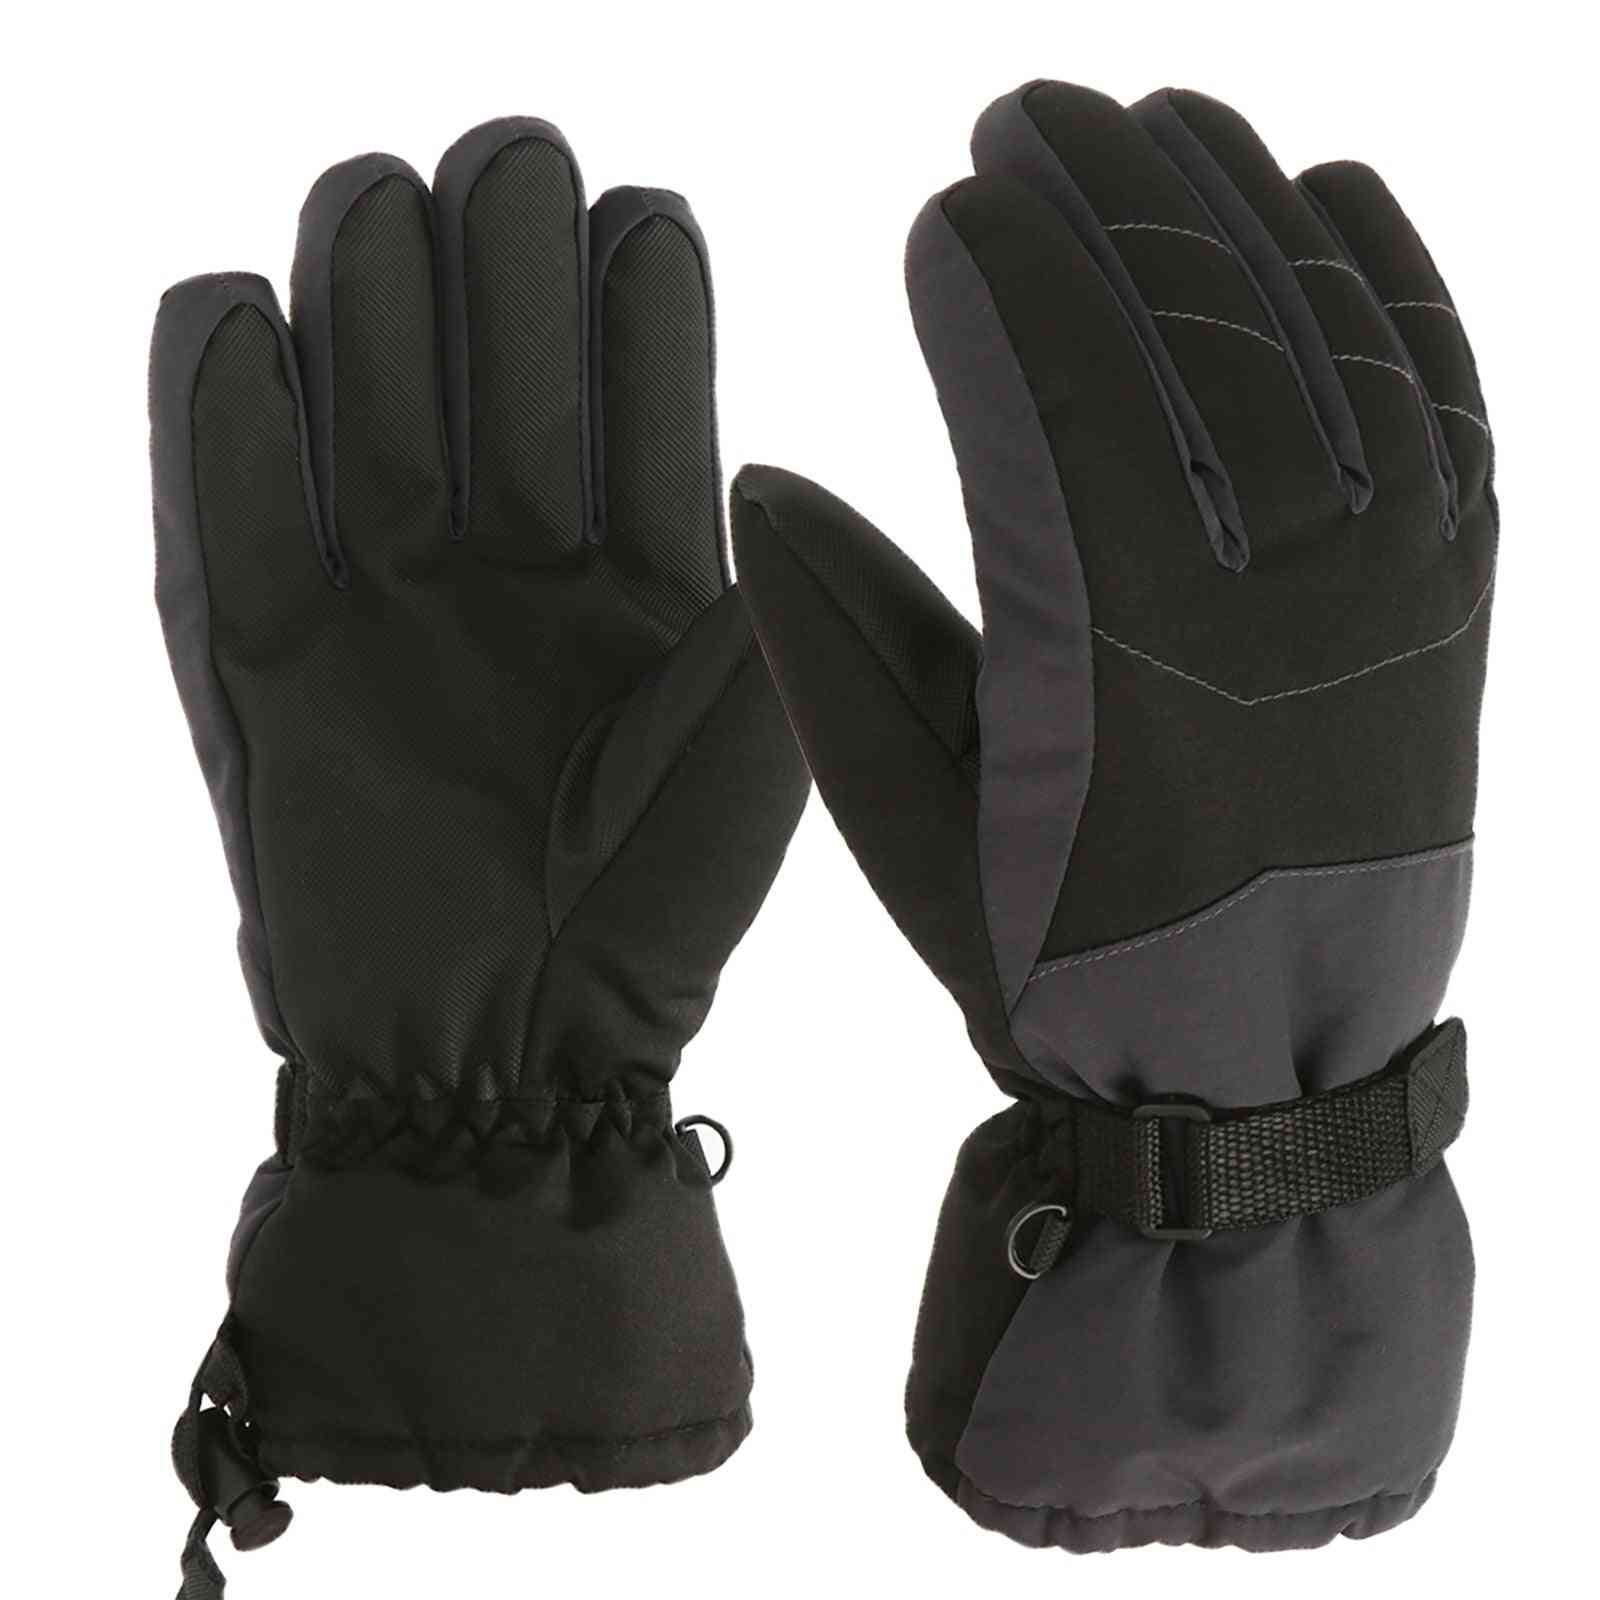 Winter Warm- Windproof And Waterproof, Outdoor Sports Skiing Gloves